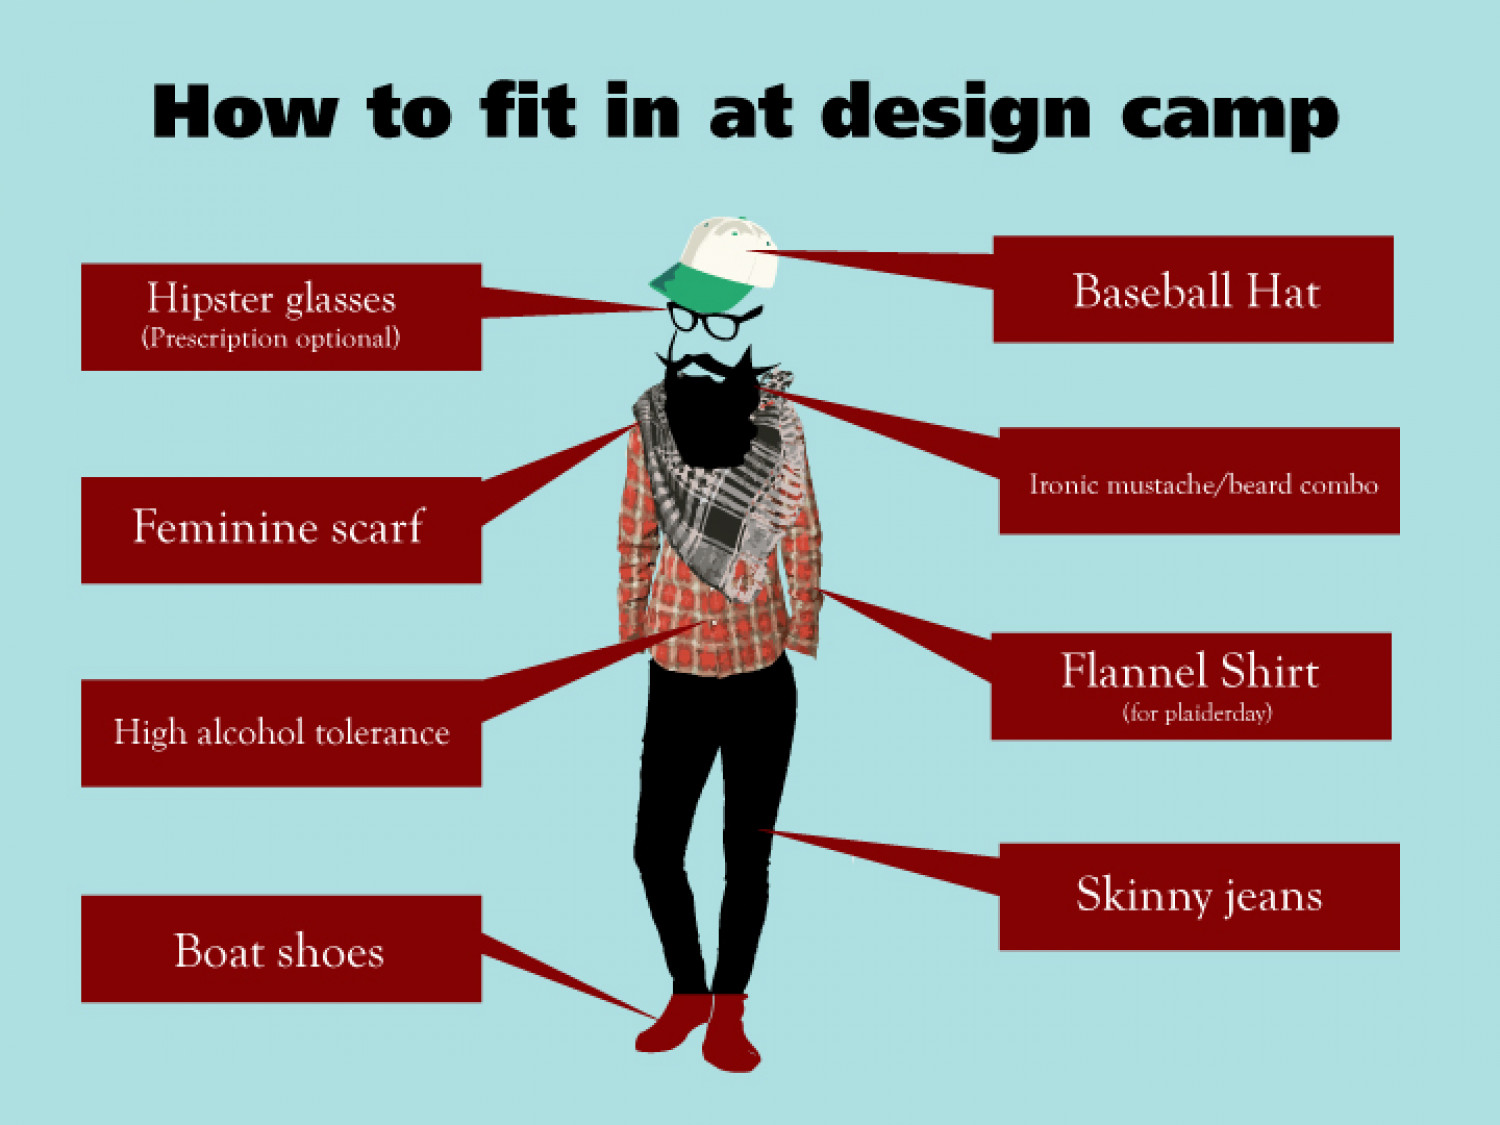 How to fit in at design camp Infographic